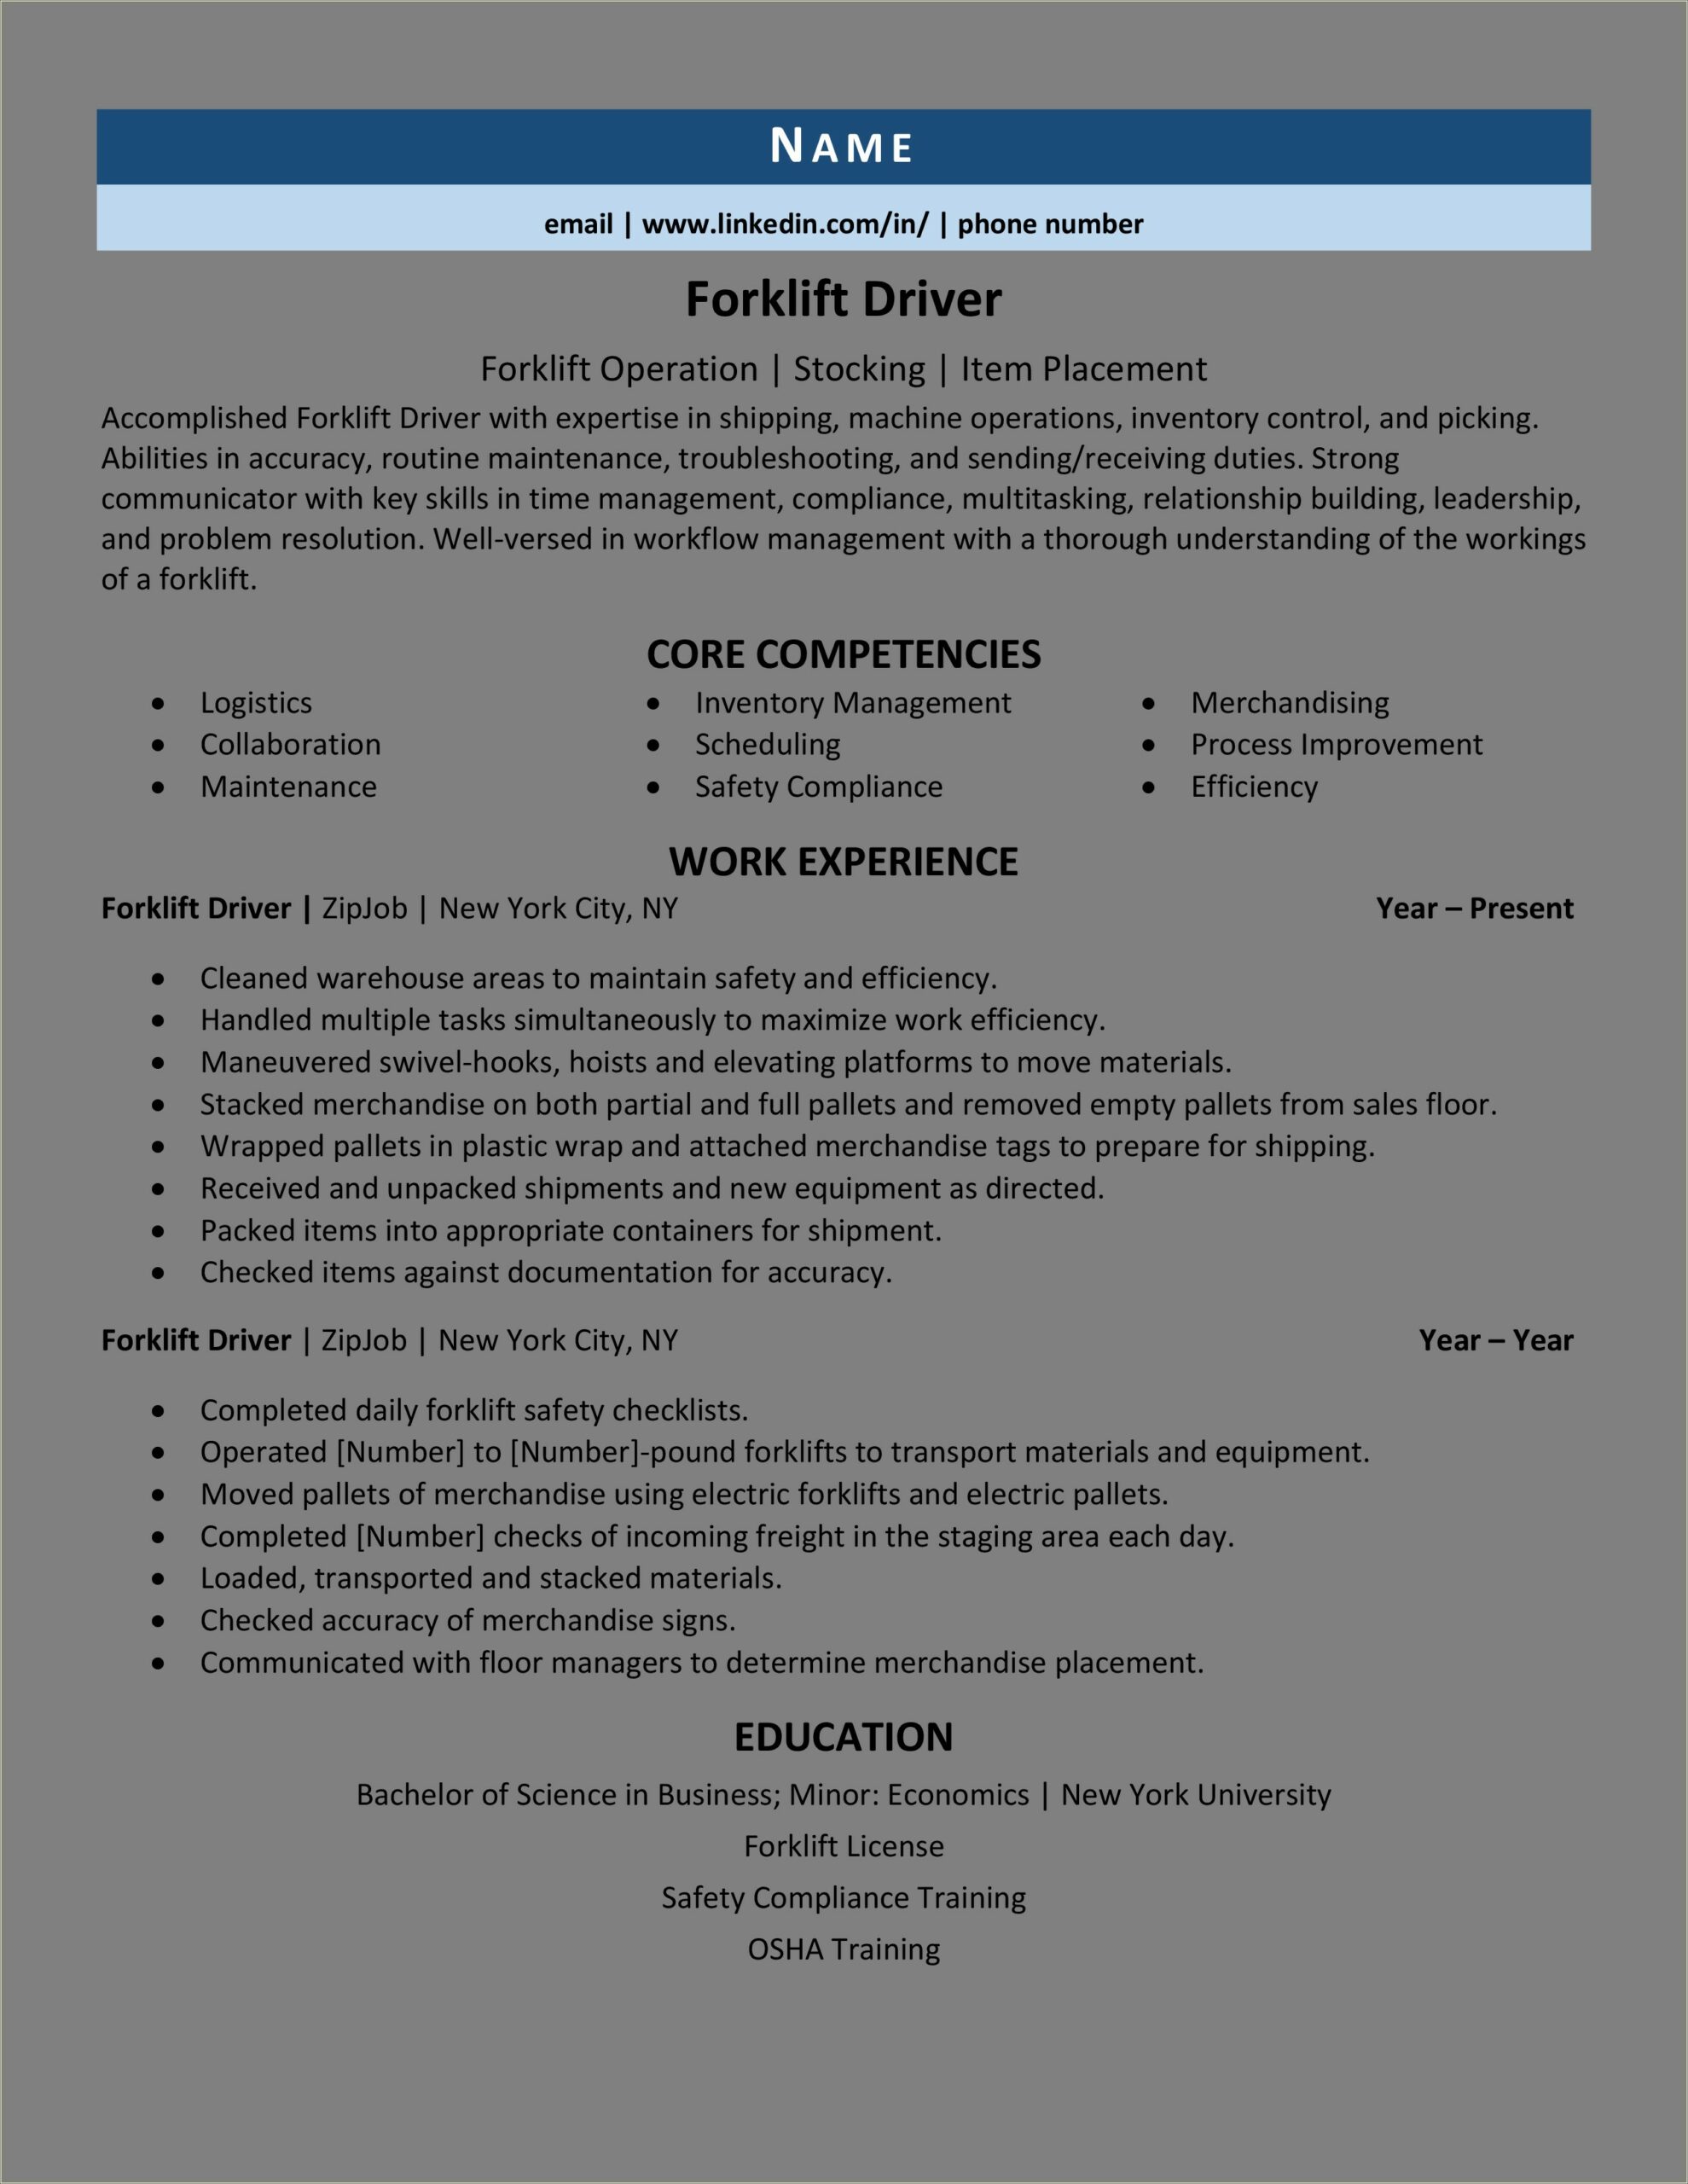 Packing And Receiving Job Description For Resume